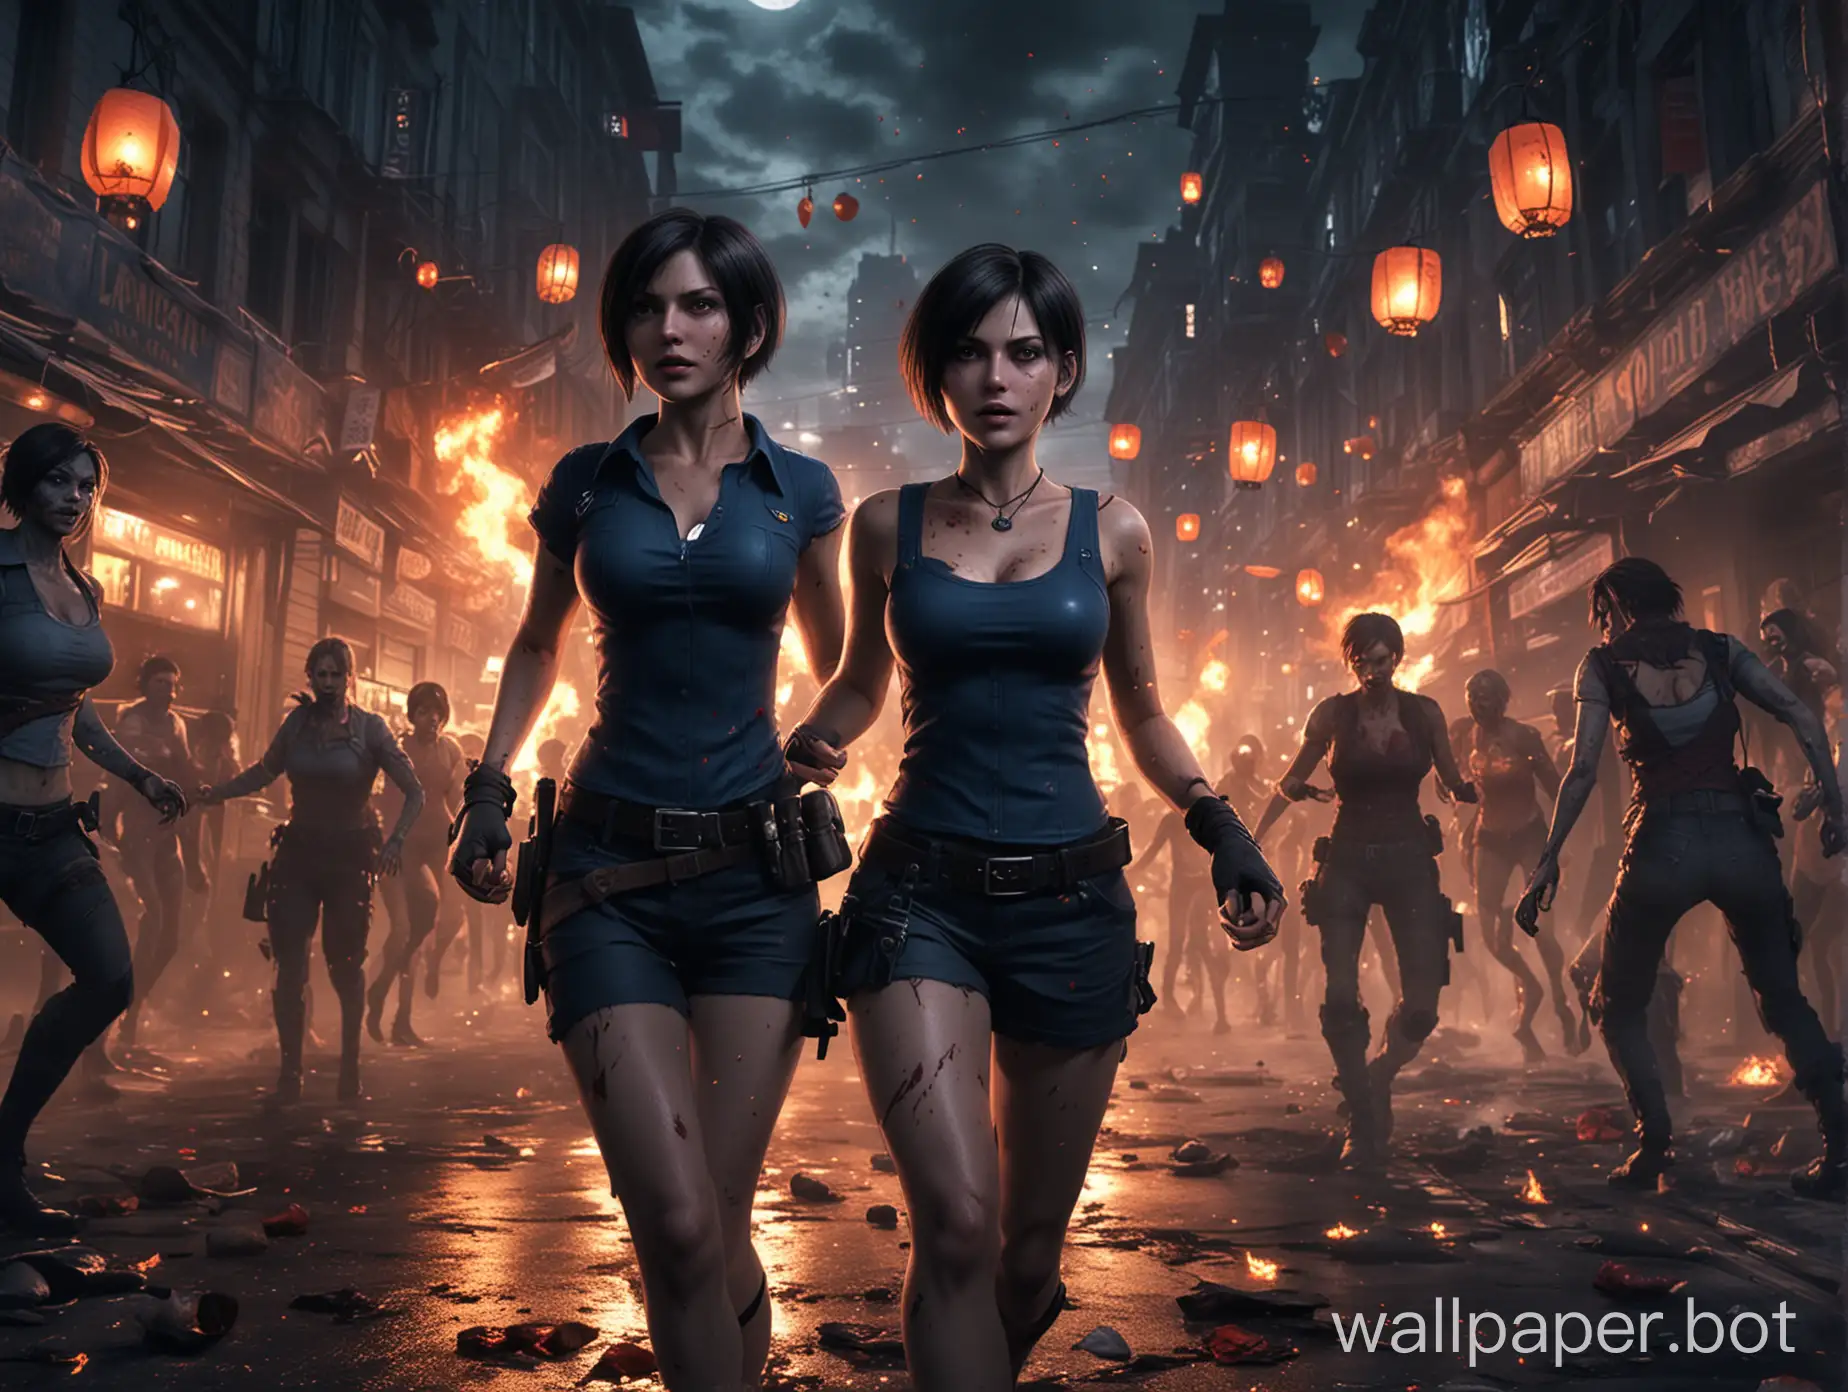 Jill Valentine and Ada Wong are running down the street of the night city from a crowd of zombies, lanterns shining, burning cars in the background, dark background, short hair